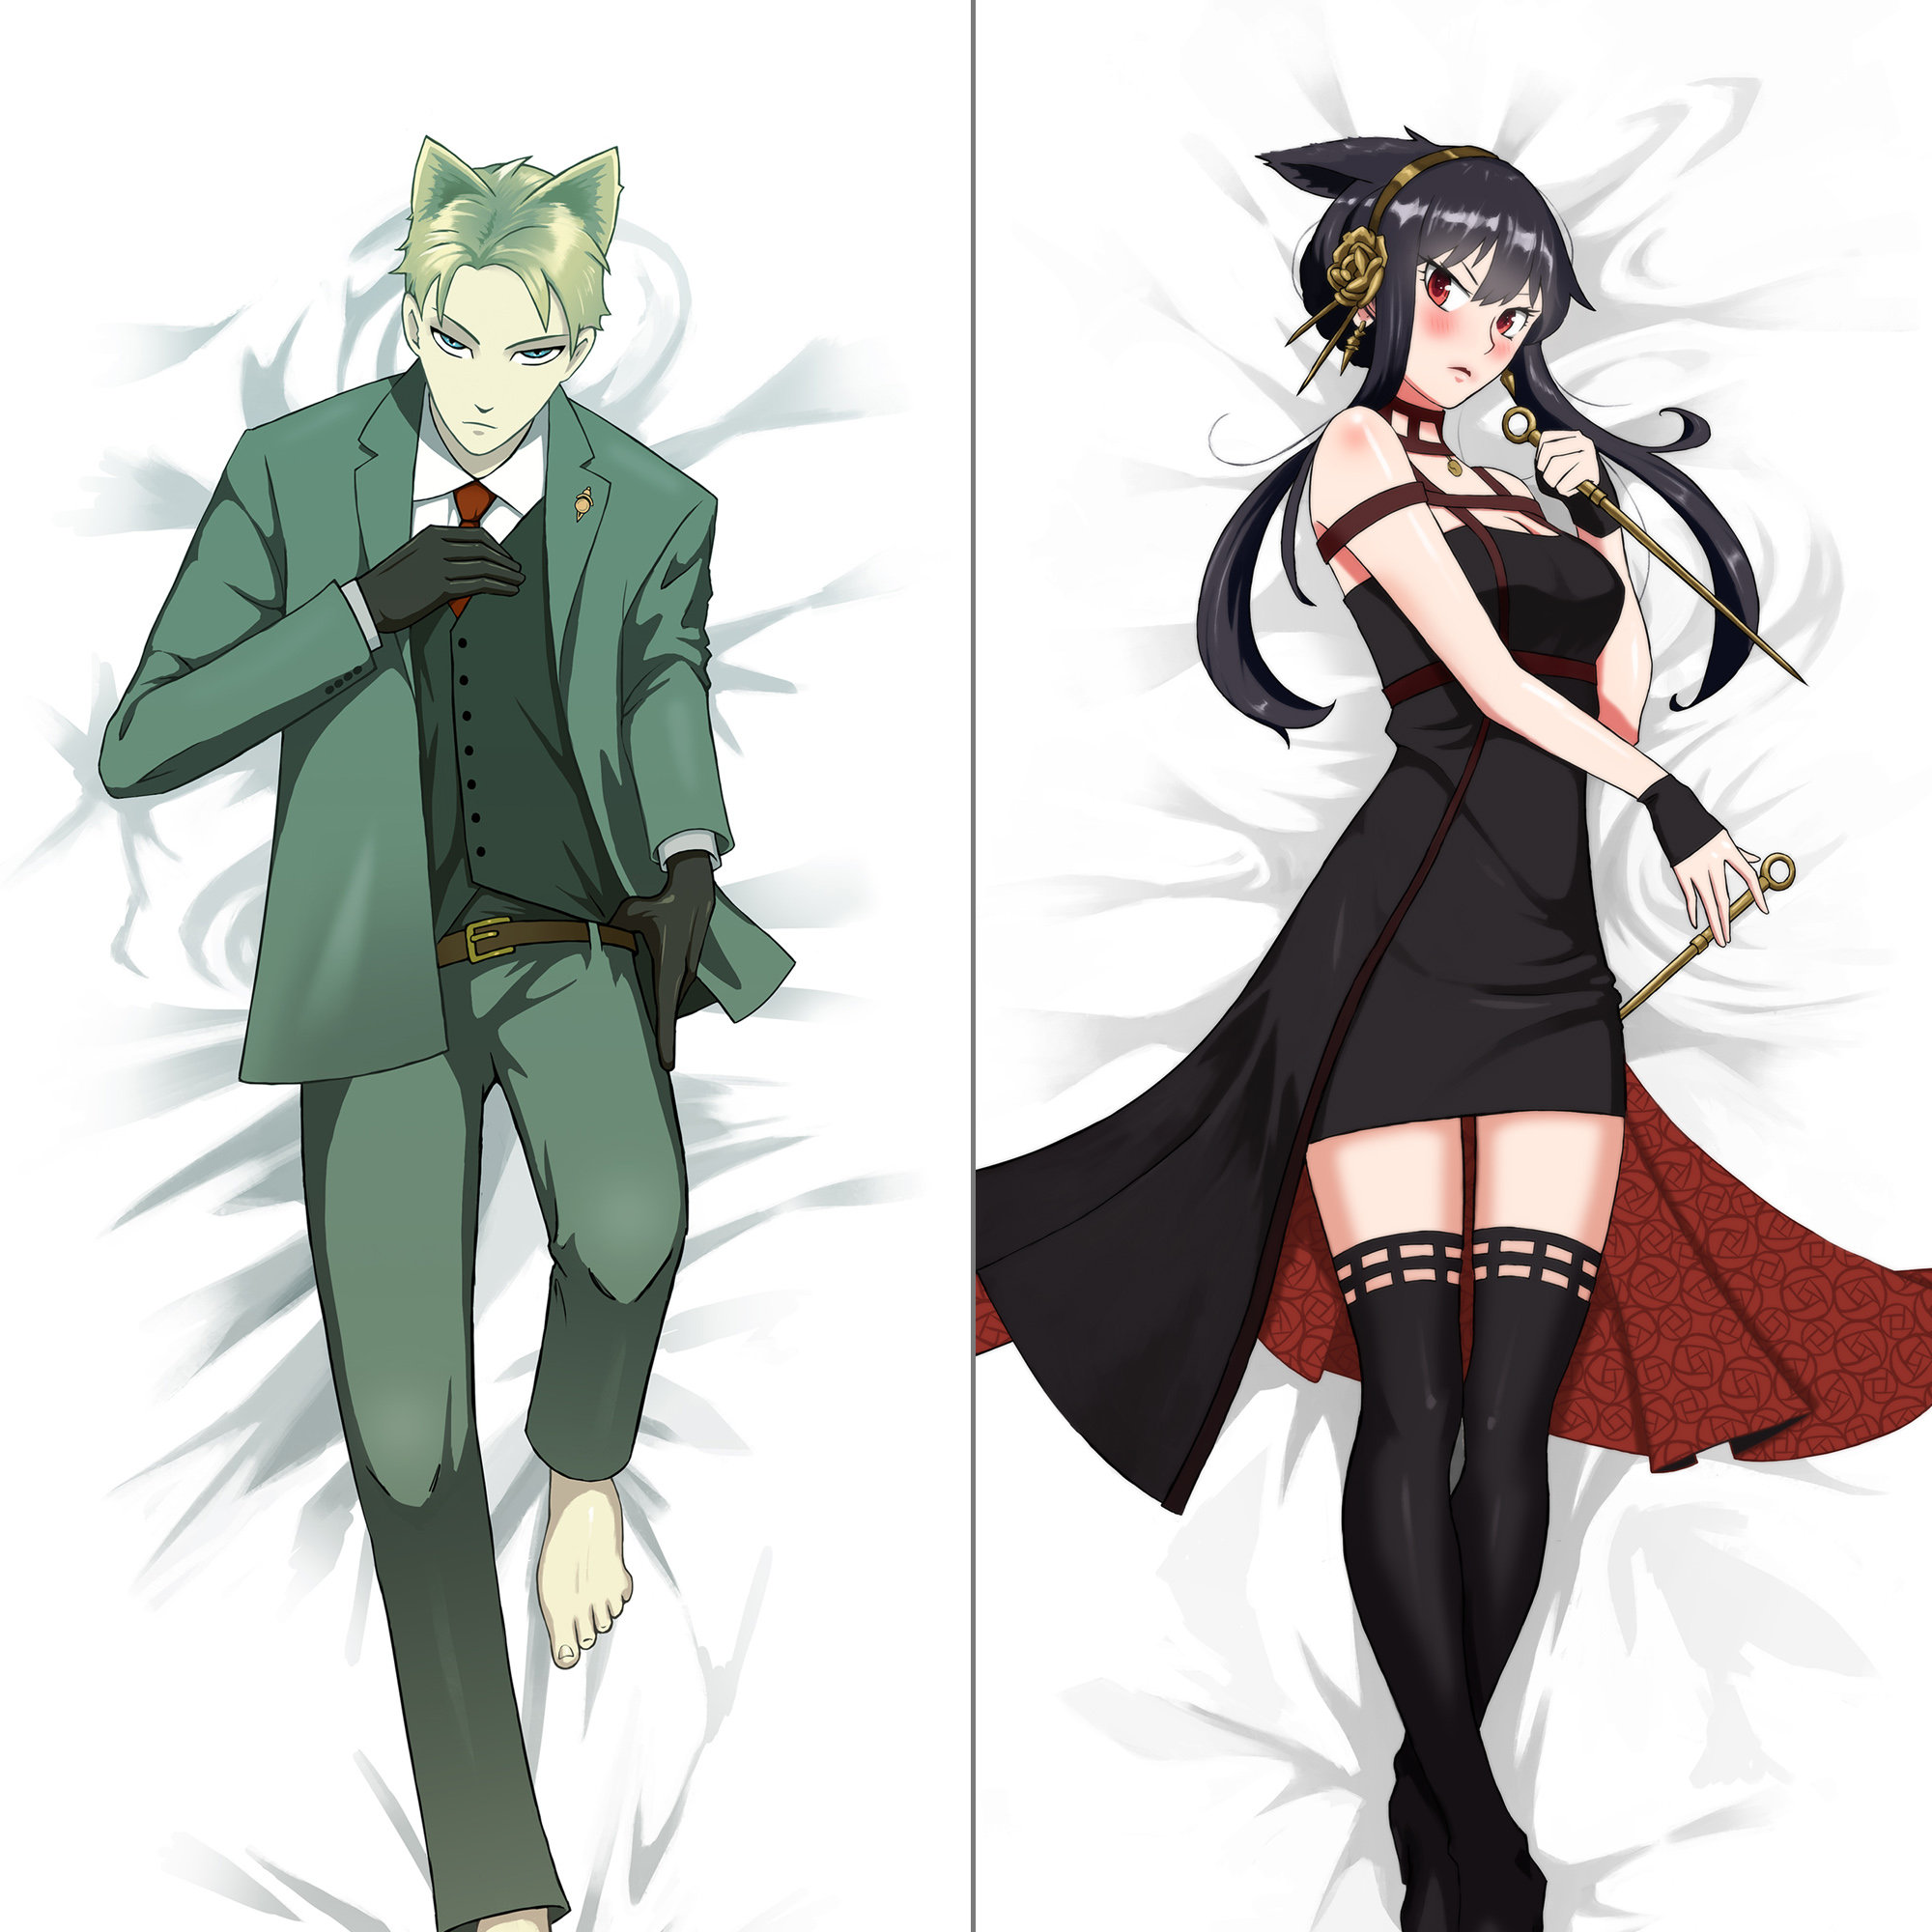 Male Anime Body Pillow Collection is on Sale Now! - Anime Pillow Shop